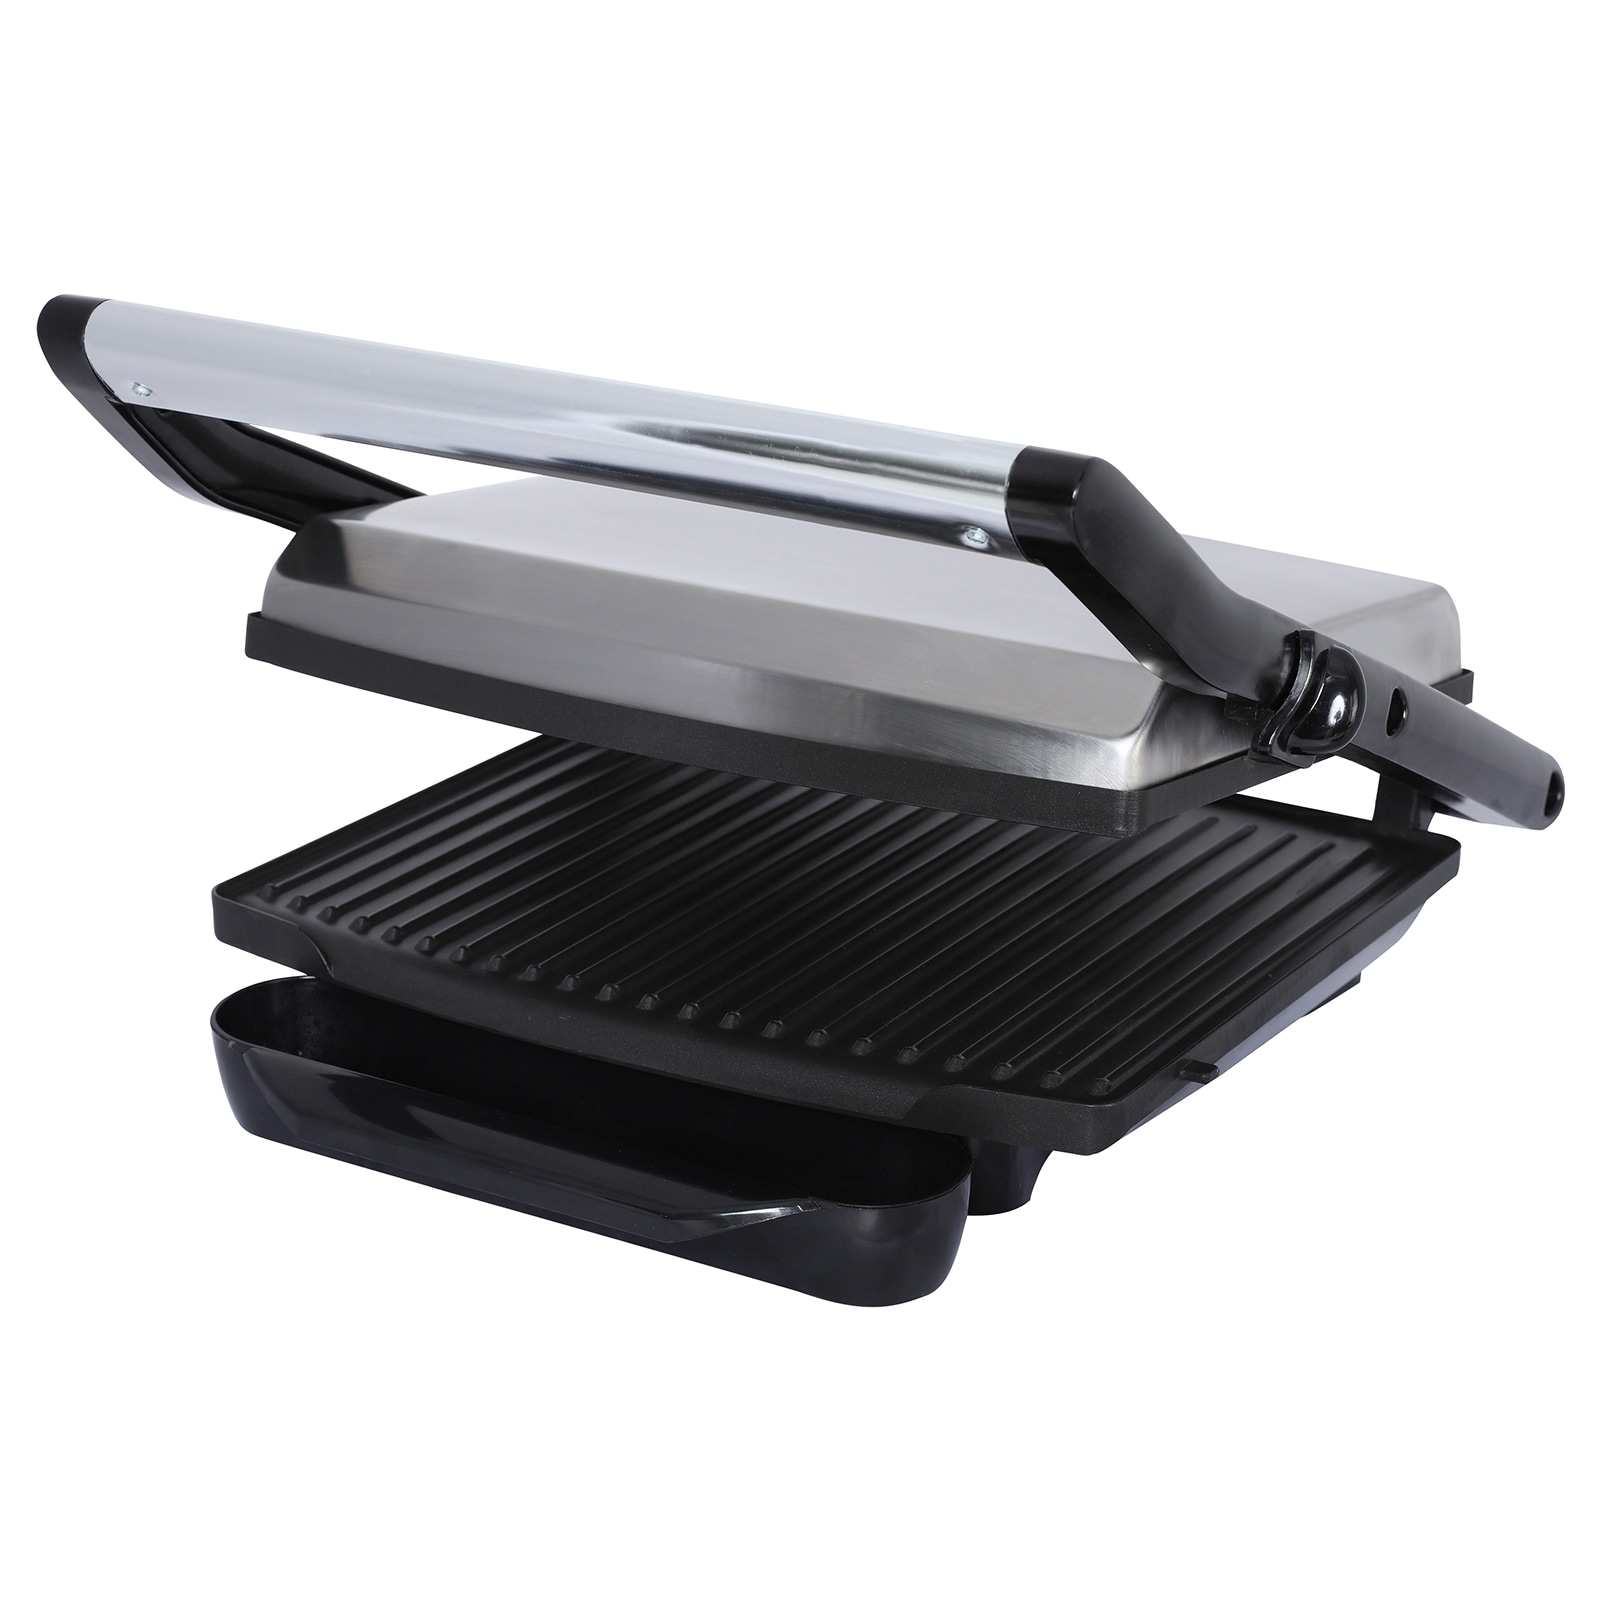 T-FAL 18-in L x 9.5-in W Electric Griddle at